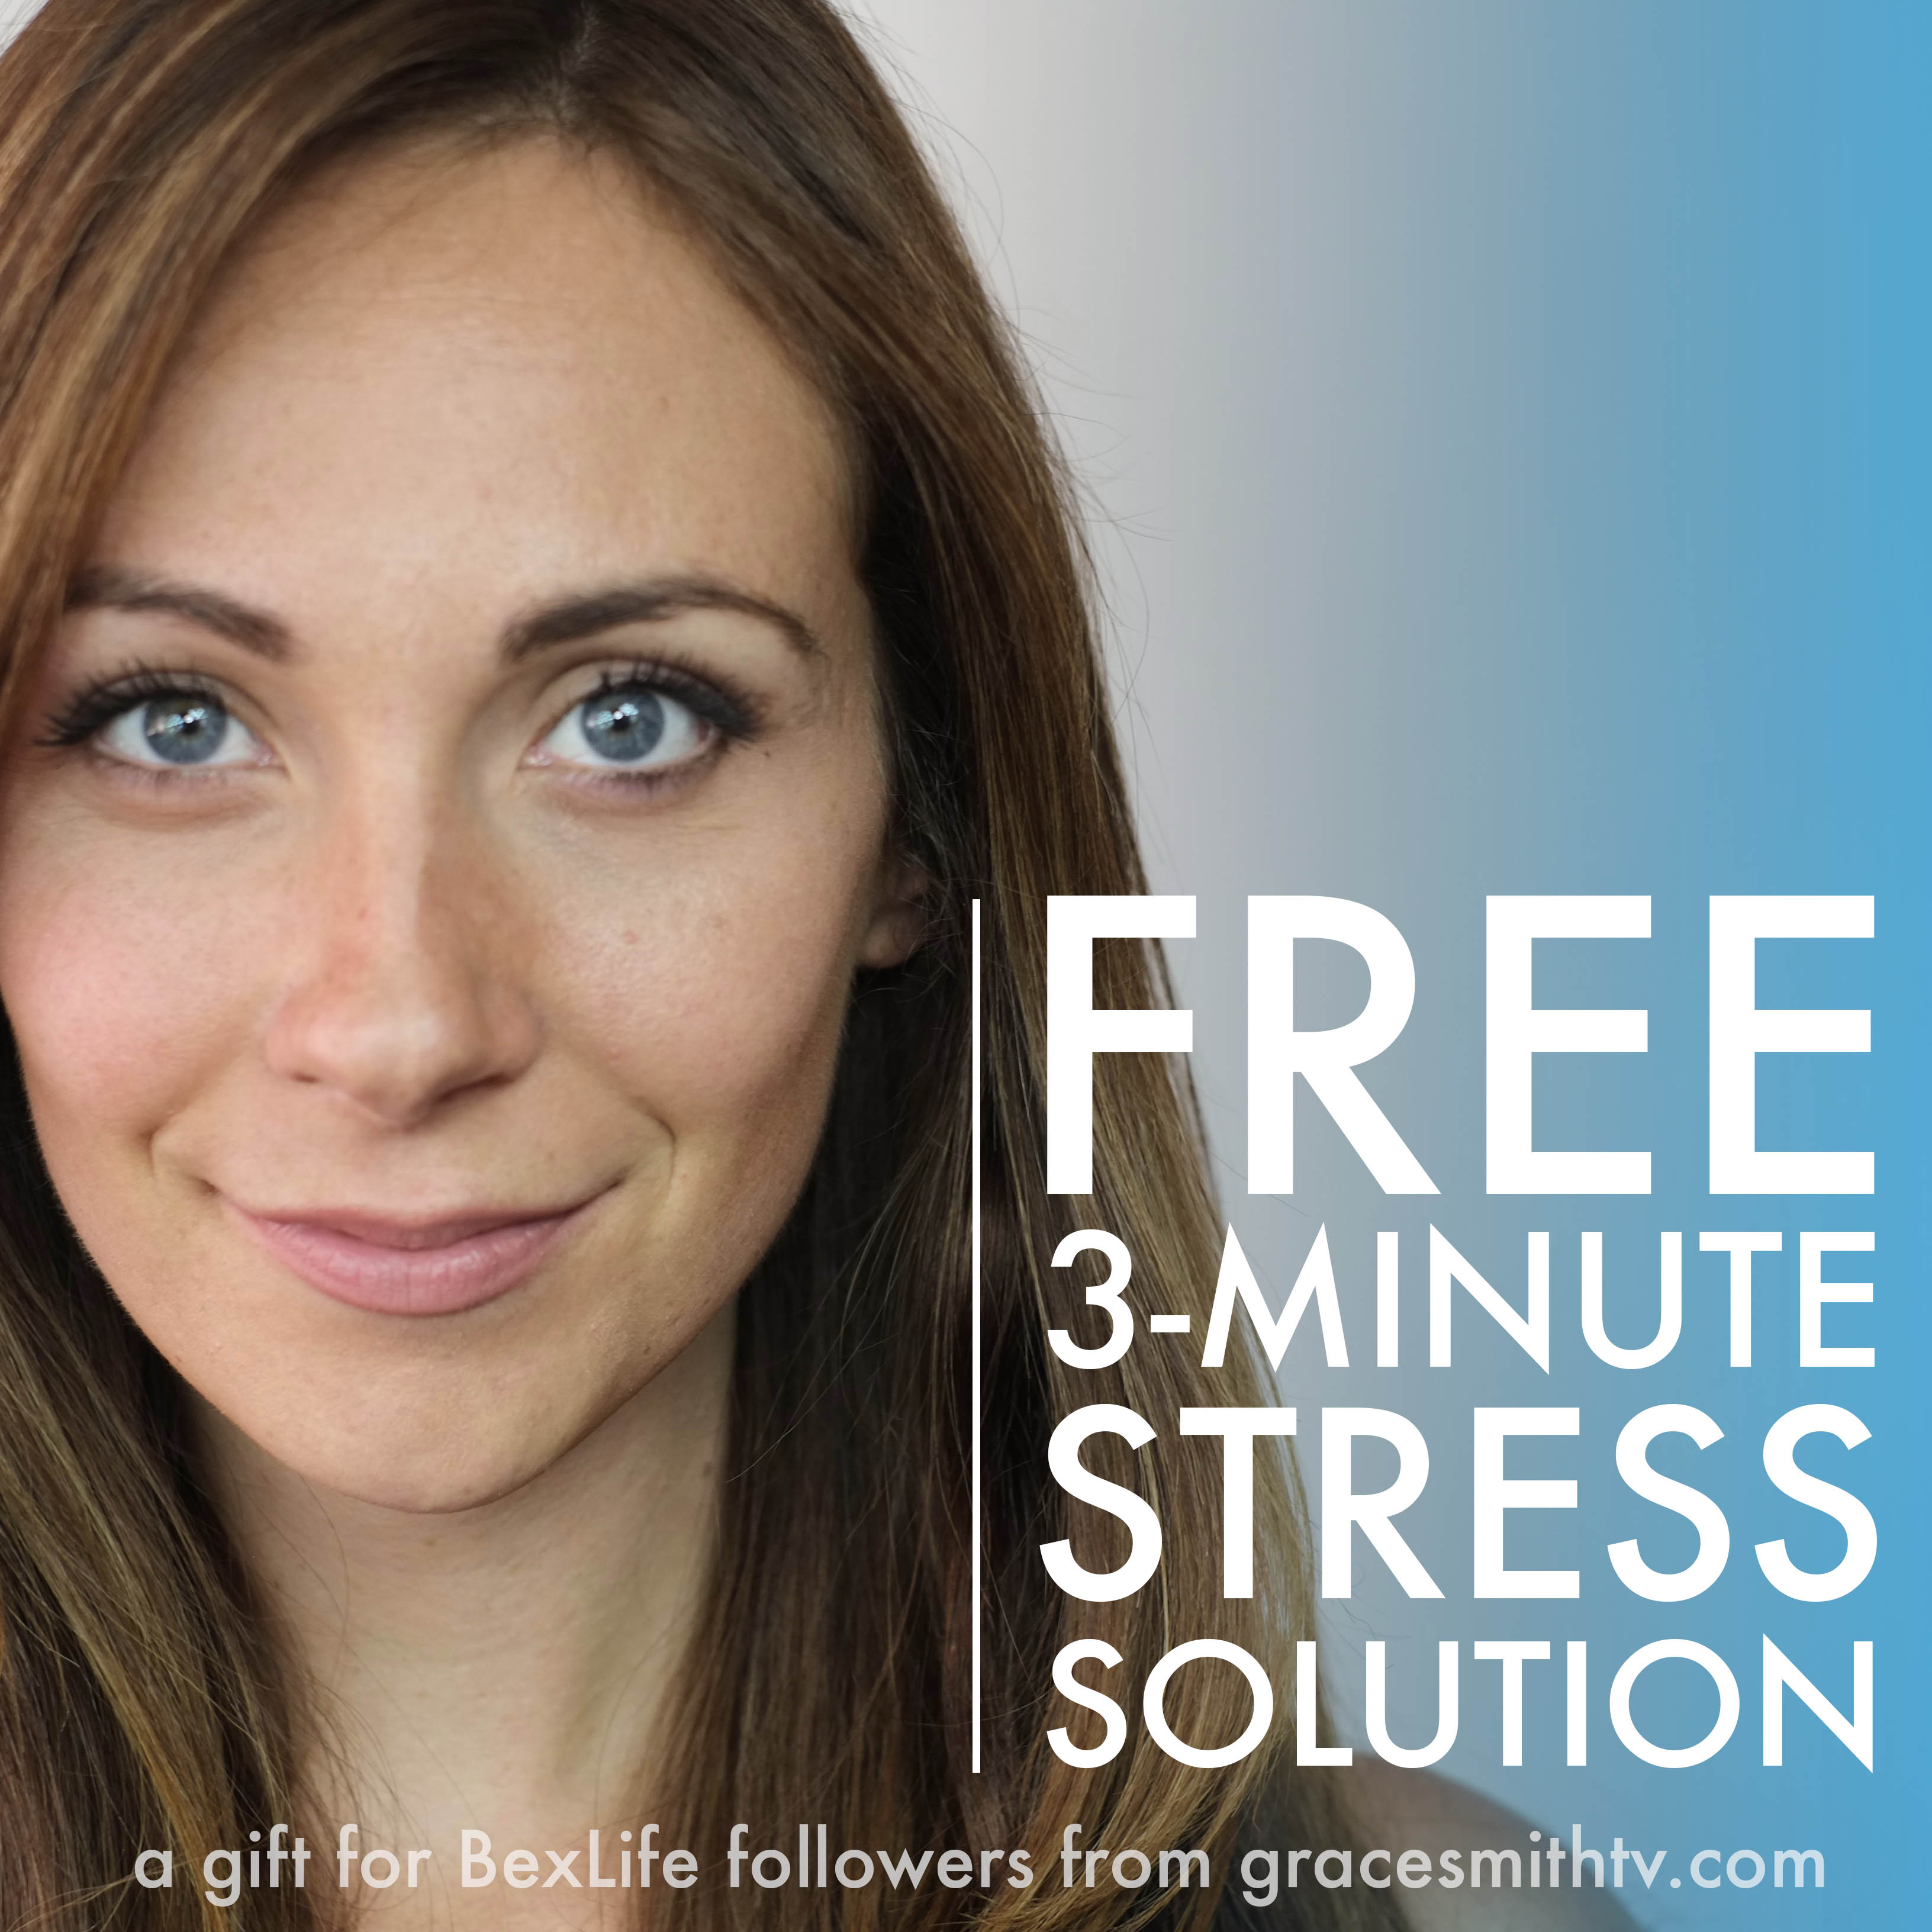 Free 3-minute meditation download by Grace Smith for BexLife.com readers!